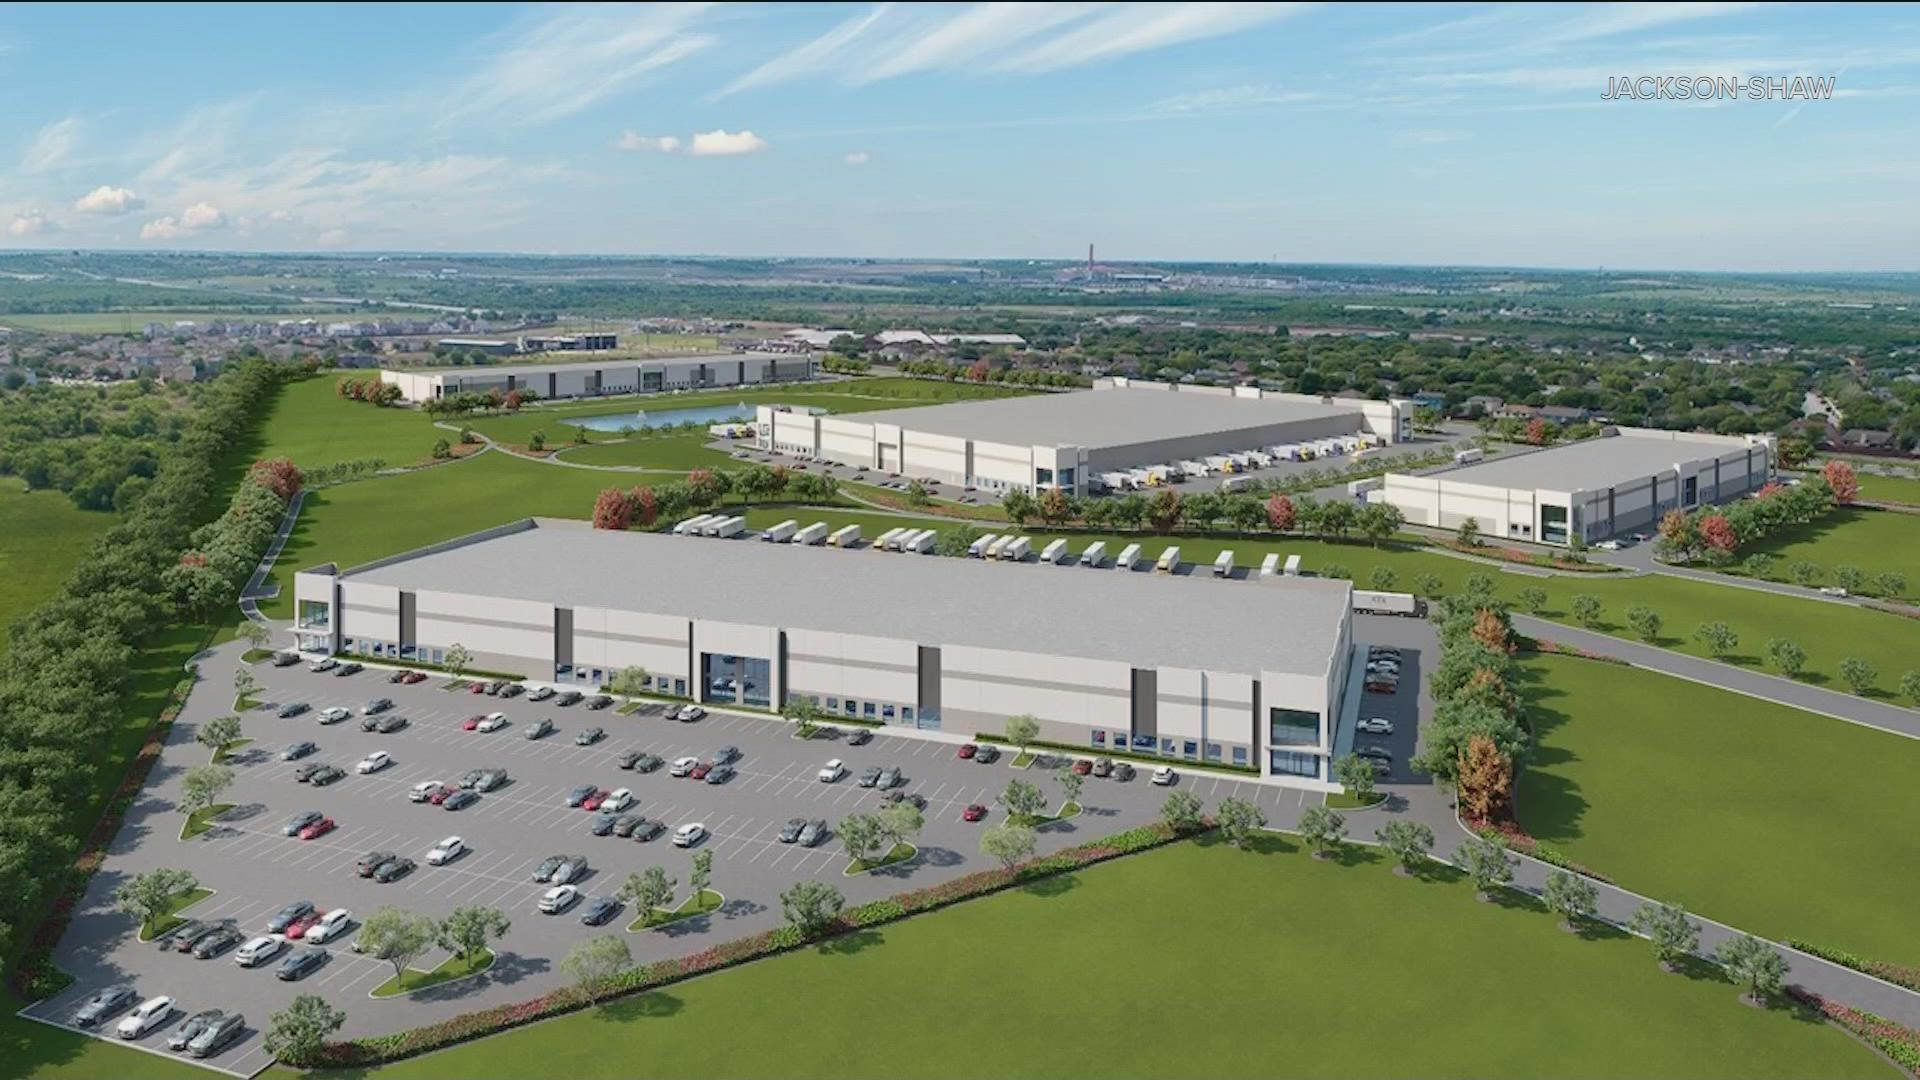 A multi-national plumbing and heating company has signed a lease for a new industrial park in southeast Austin. It will be nearby the airport and Tesla factory.